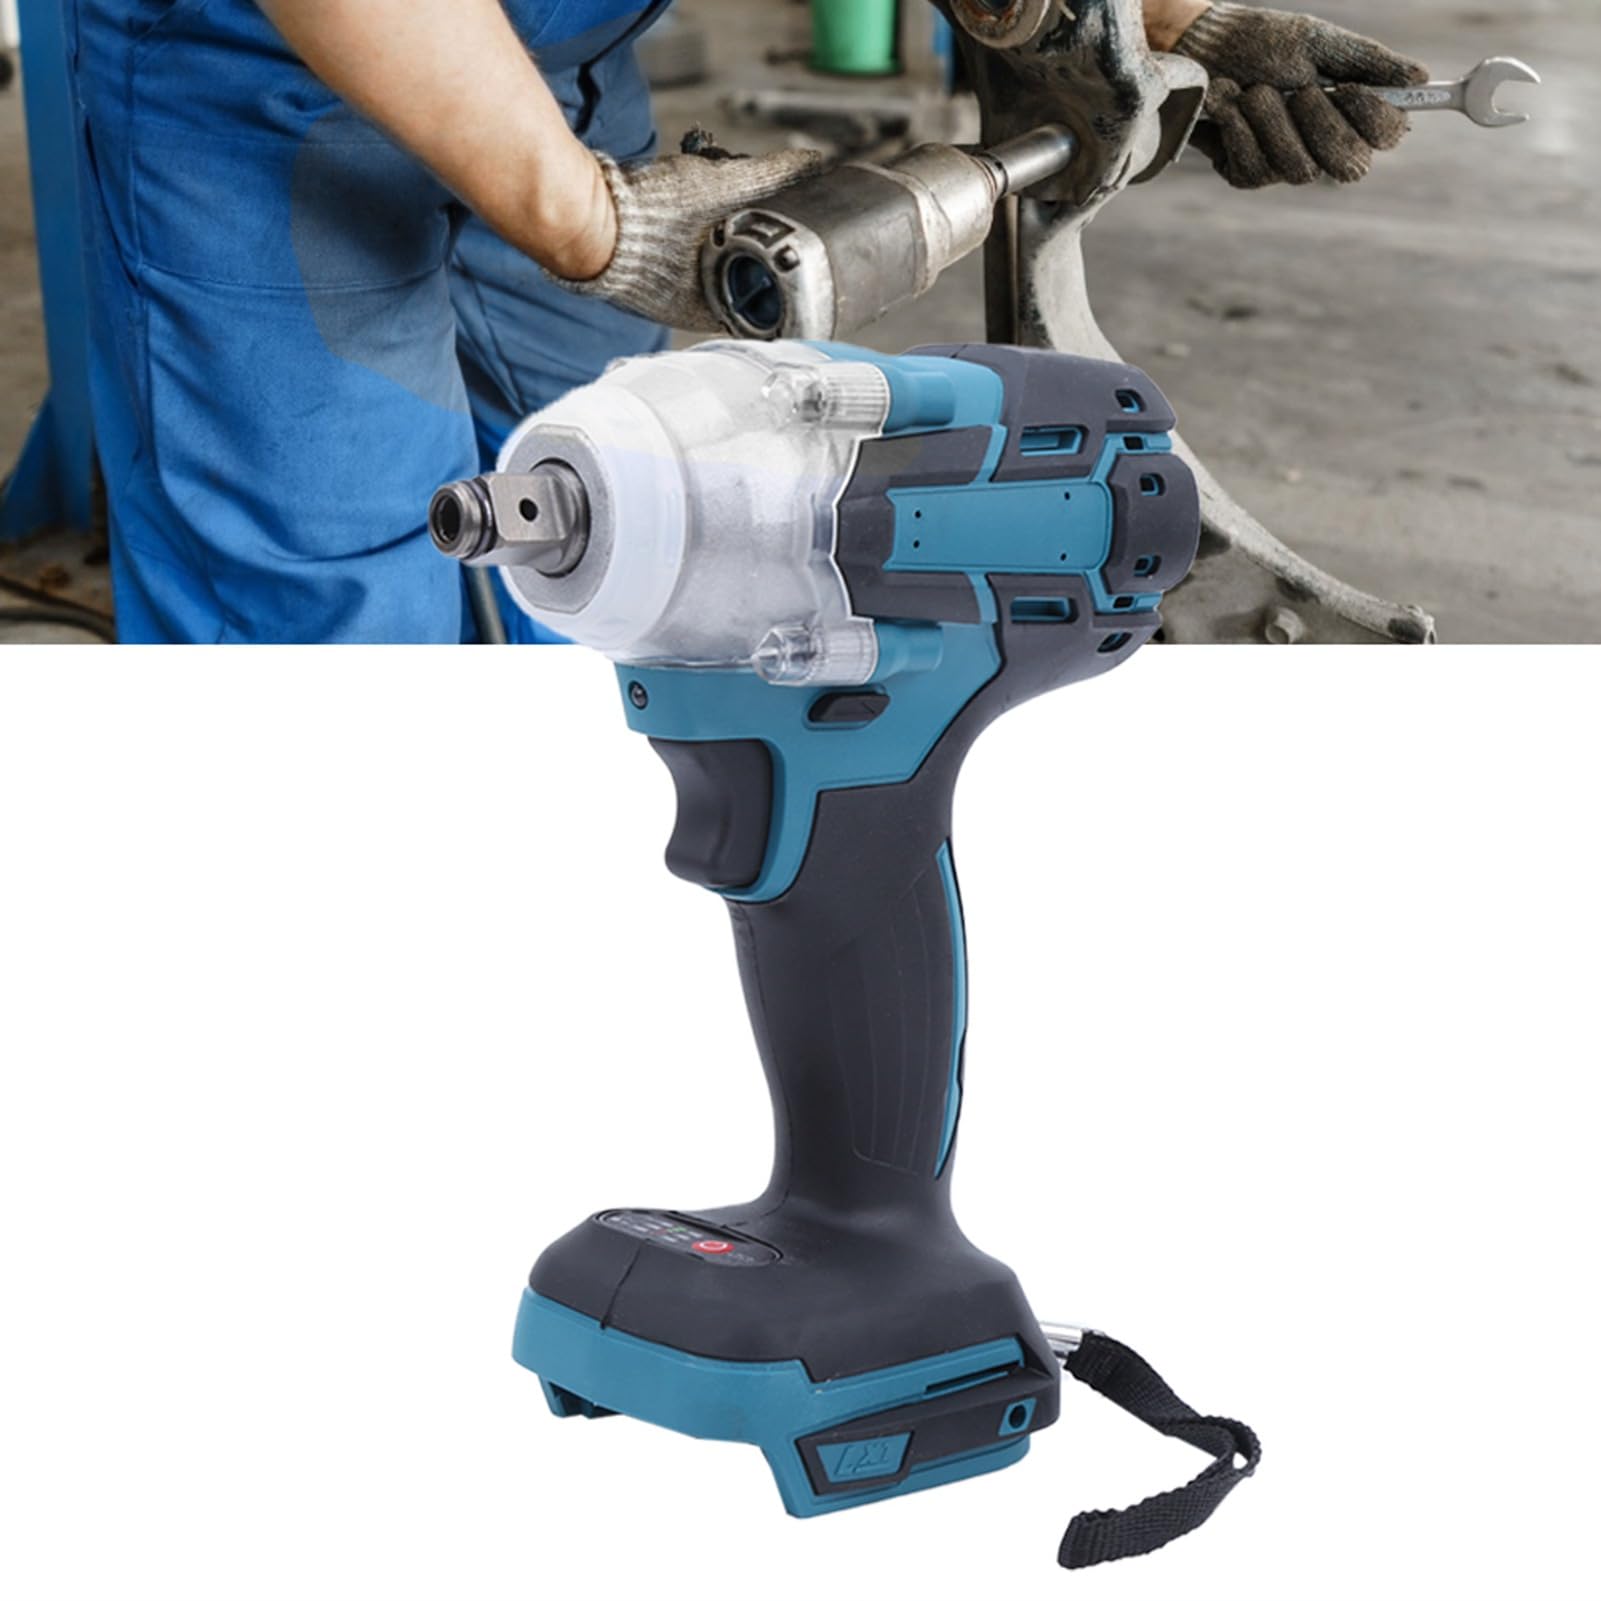 LiebeWH 21V Brushless Impact Wrench, Cordless Impact Wrench Tungsten Steel Shaft Electric Spanner Non‑Slip Handle Rechargeable for Construction Site Shelves Maintenance Woodworking